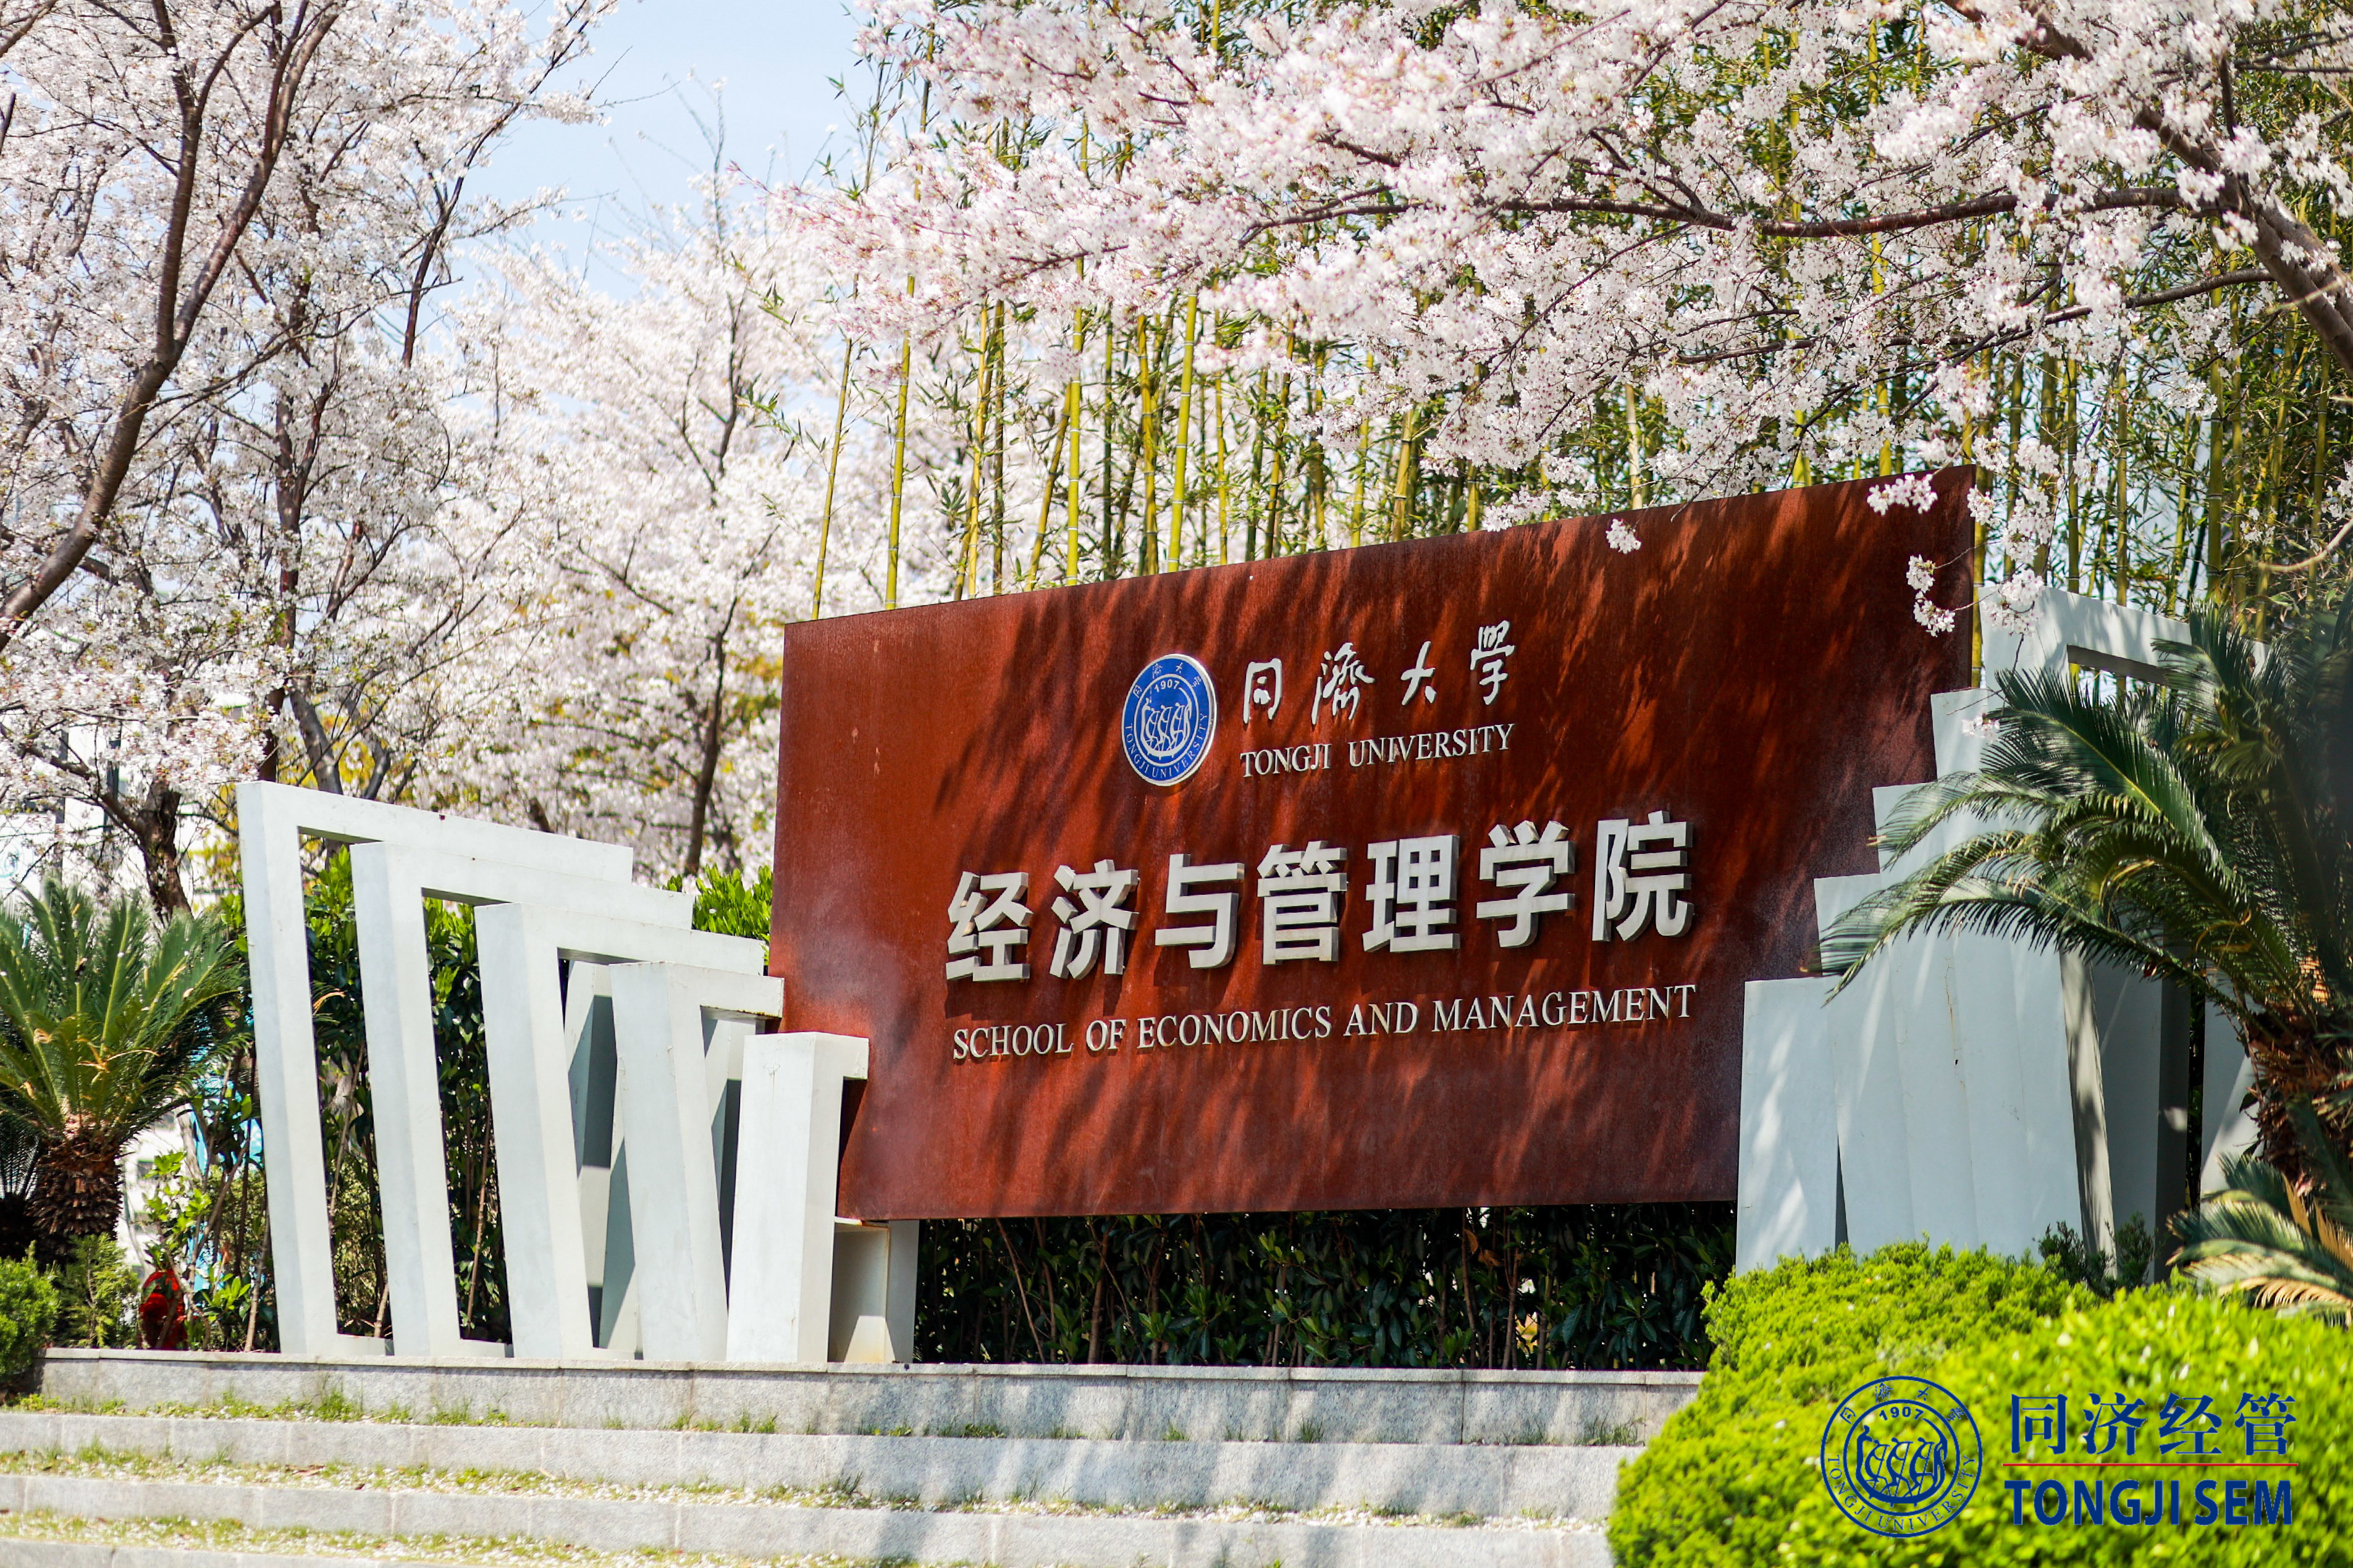 Five Scholars From SEM, Tongji  Named as “Highly Cited Chinese Researchers” in Elsevier’s 2022 List